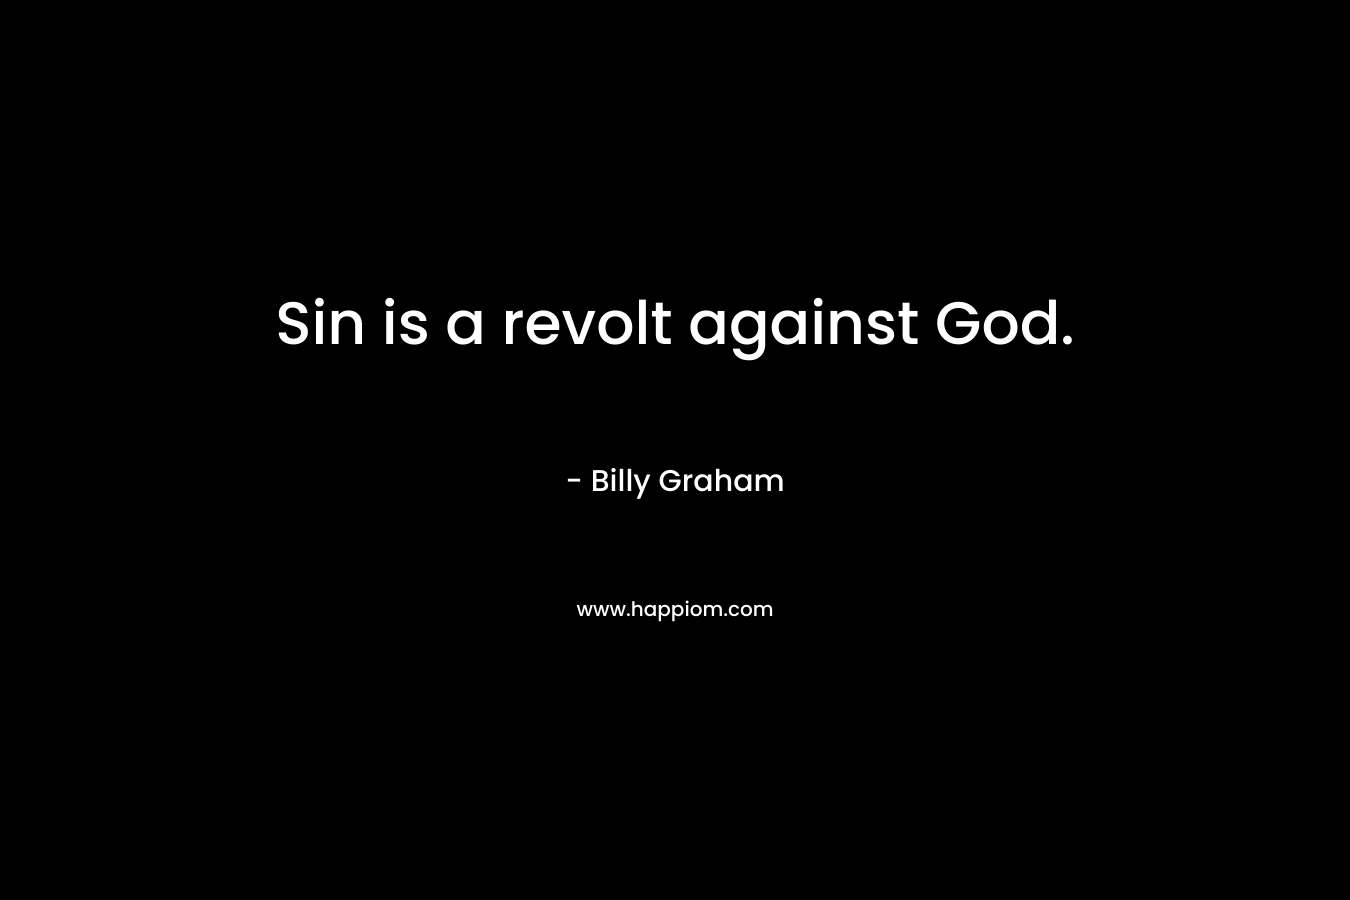 Sin is a revolt against God.